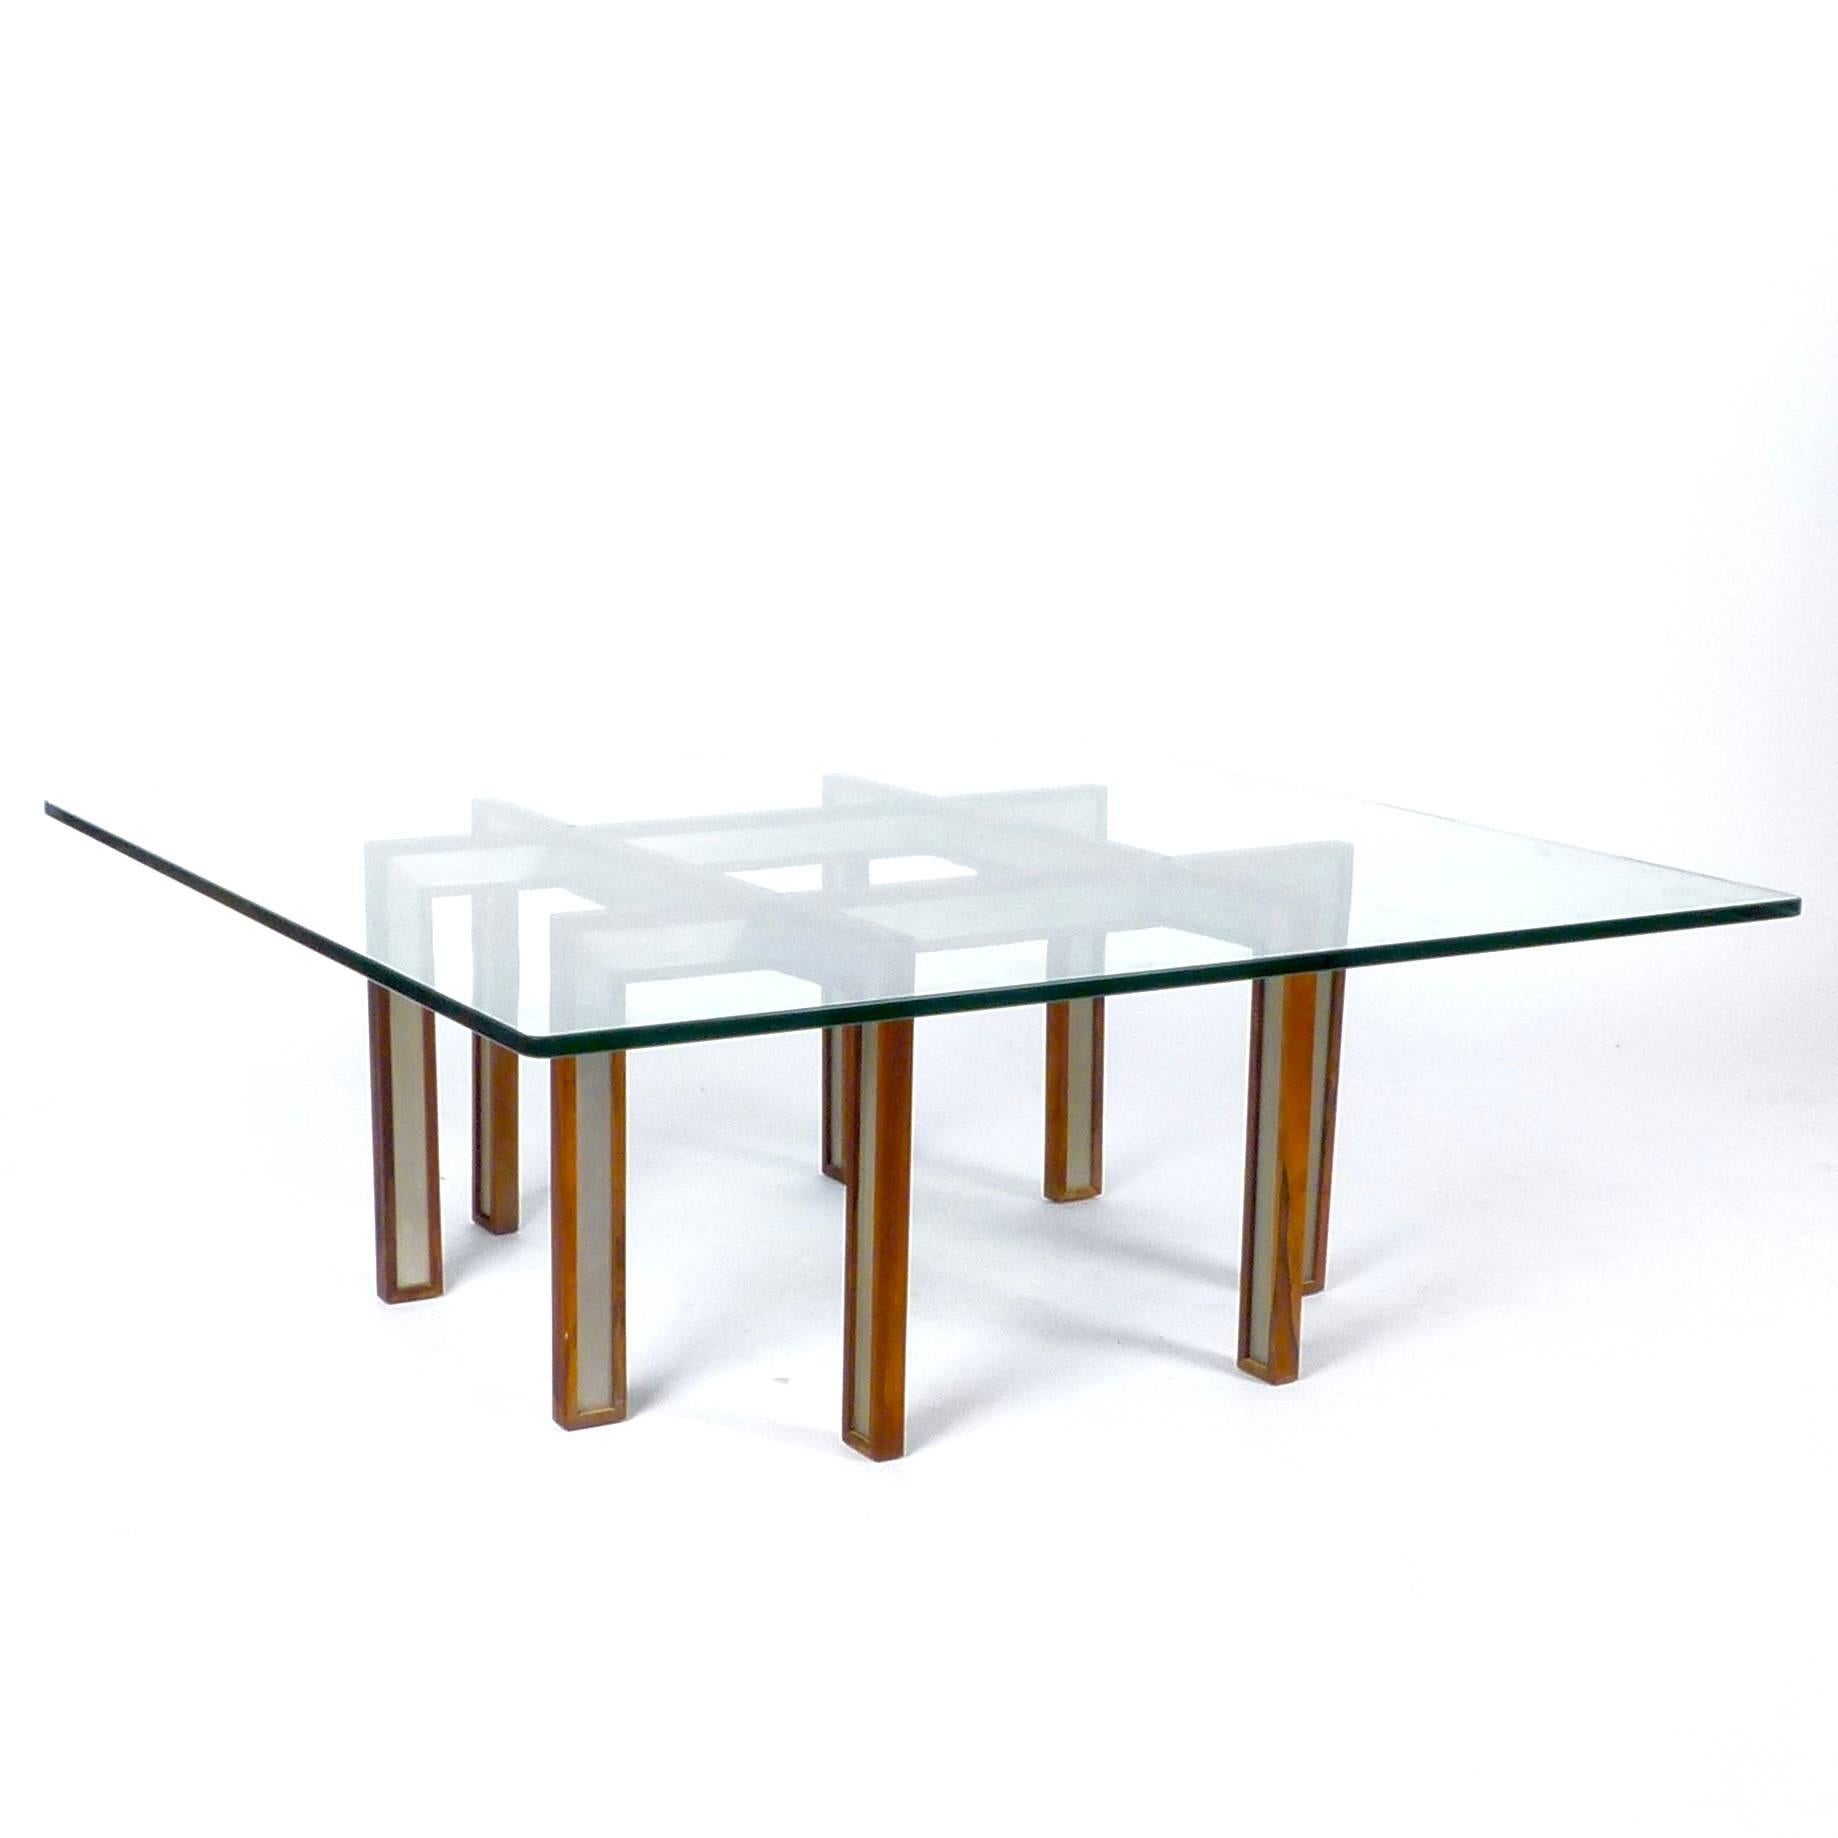 Unique 1960s rosewood and brushed steel coffee table by Henning Korch for C.H. Christensen, Denmark.